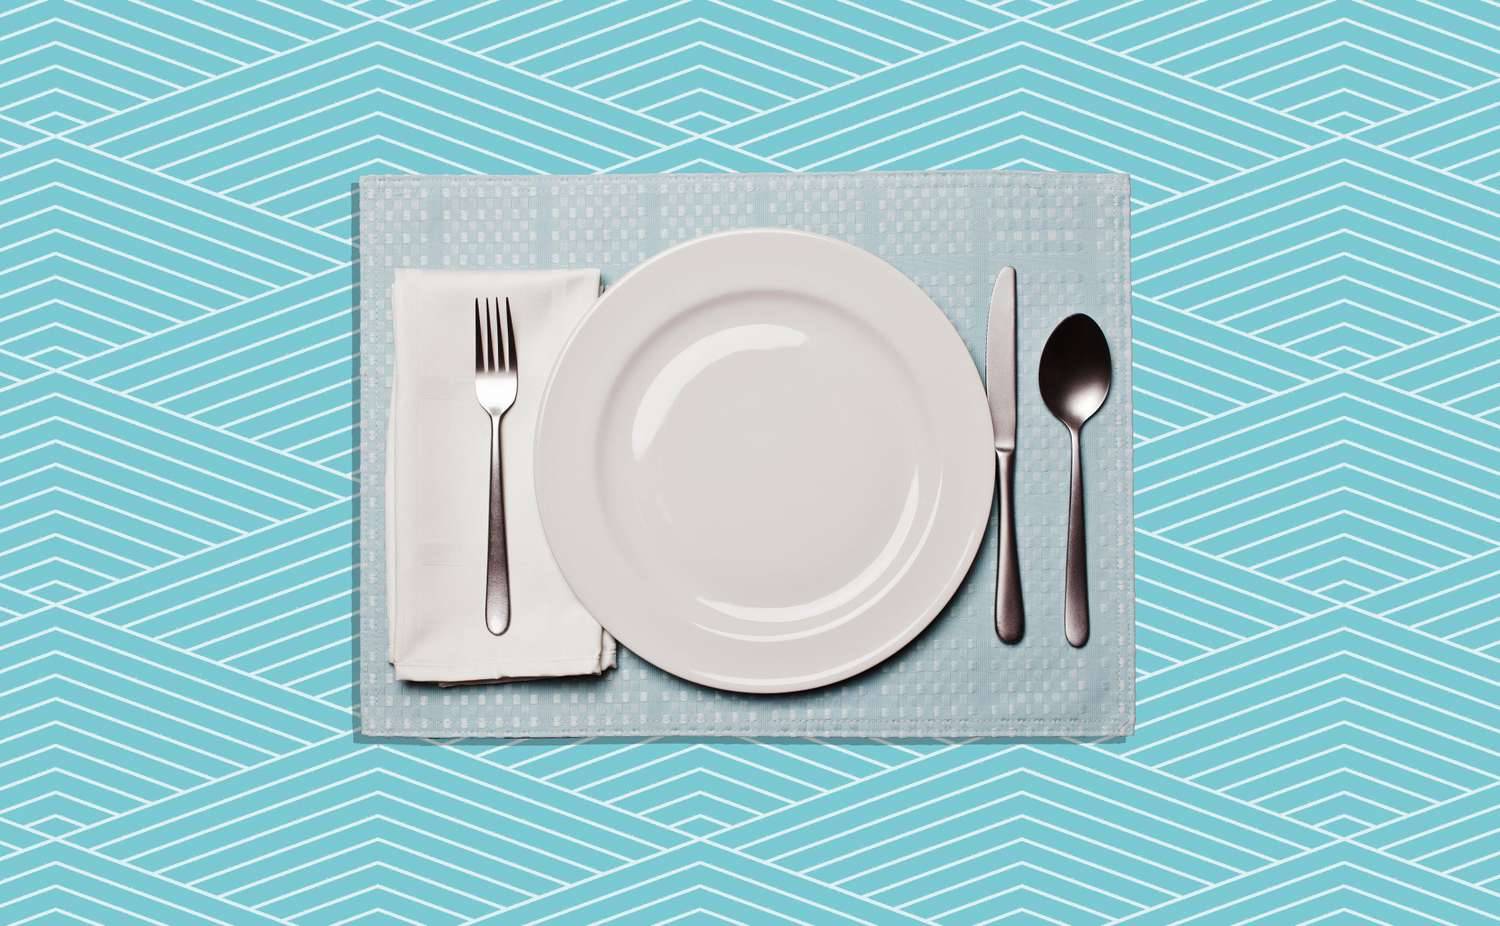 Formal Table Settings, How To Set A Formal Table For Dinner